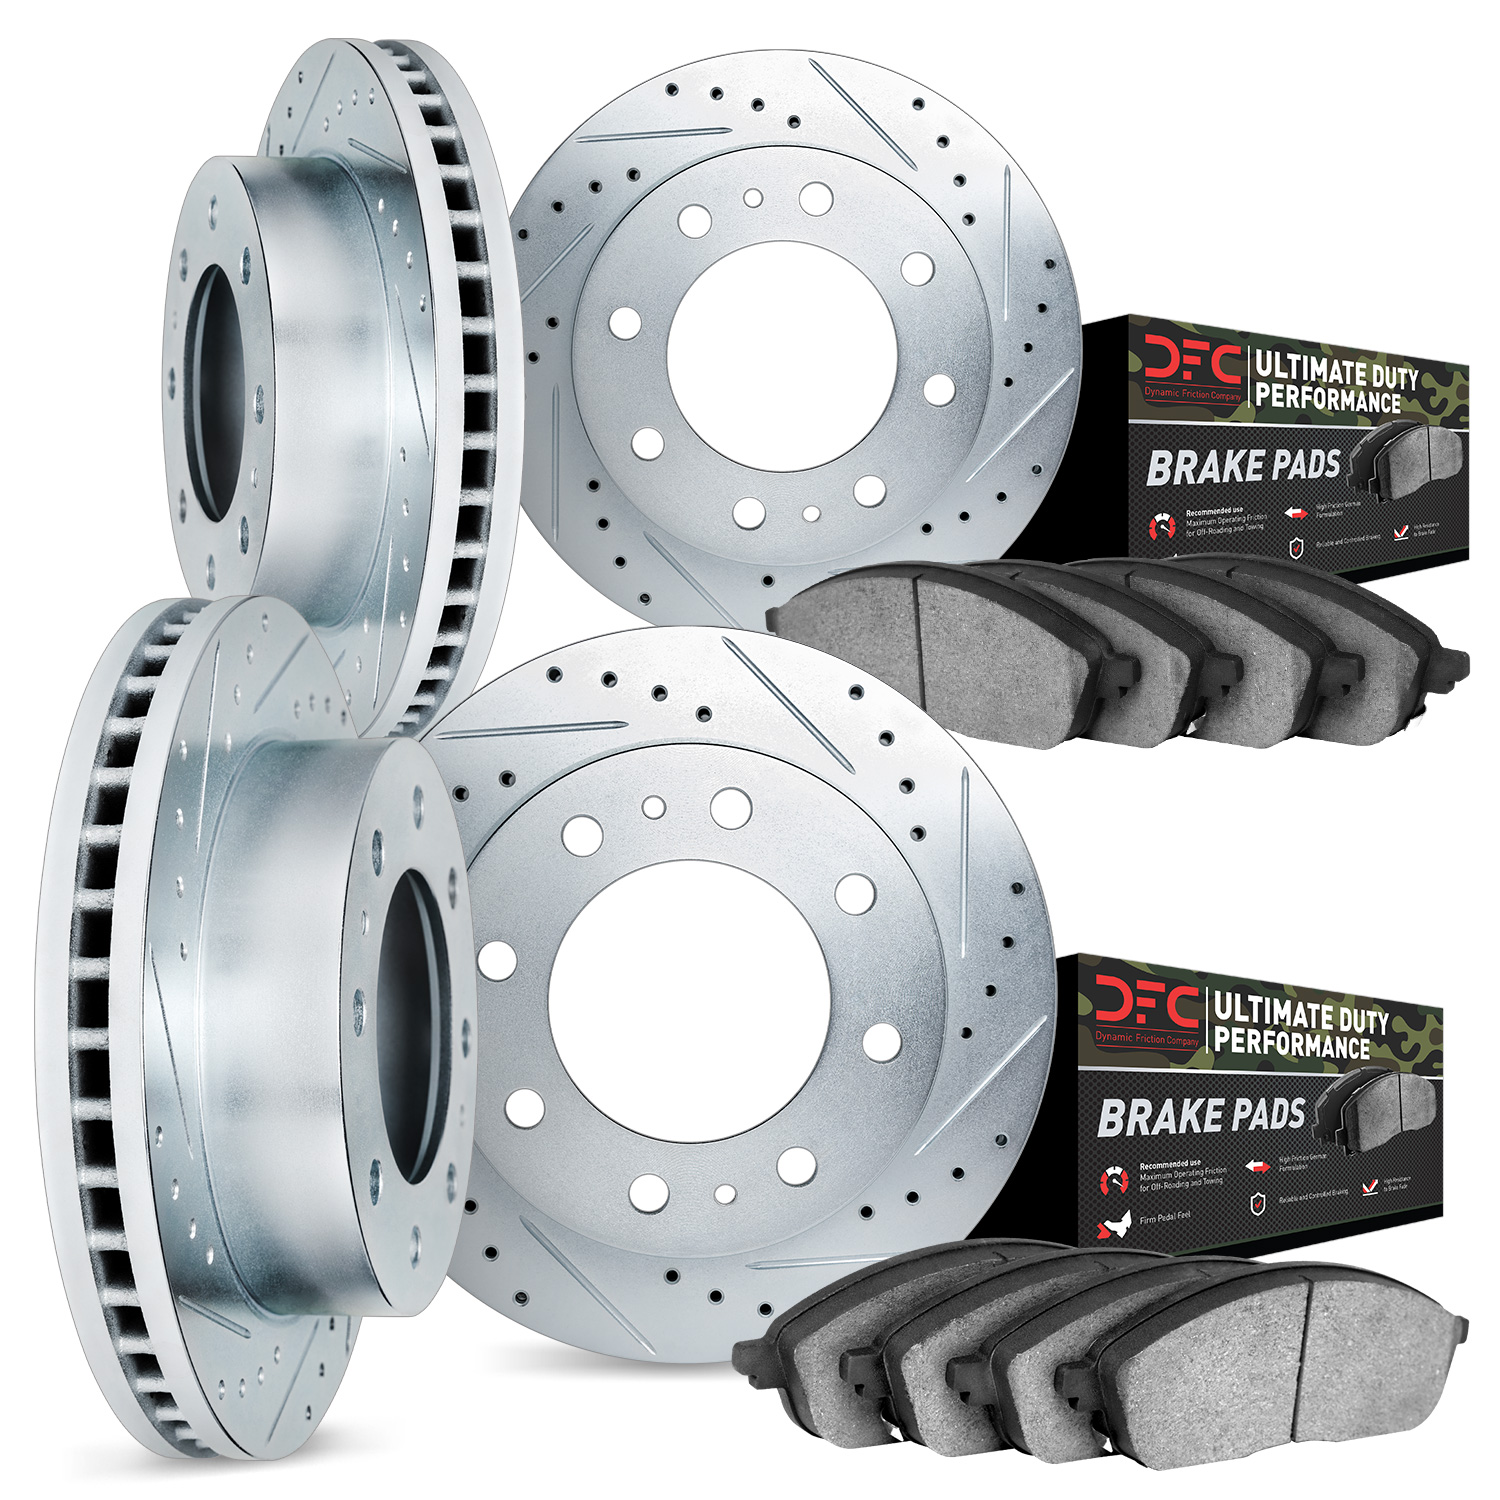 7404-48008 Drilled/Slotted Brake Rotors with Ultimate-Duty Brake Pads Kit [Silver], 2003-2005 GM, Position: Front and Rear